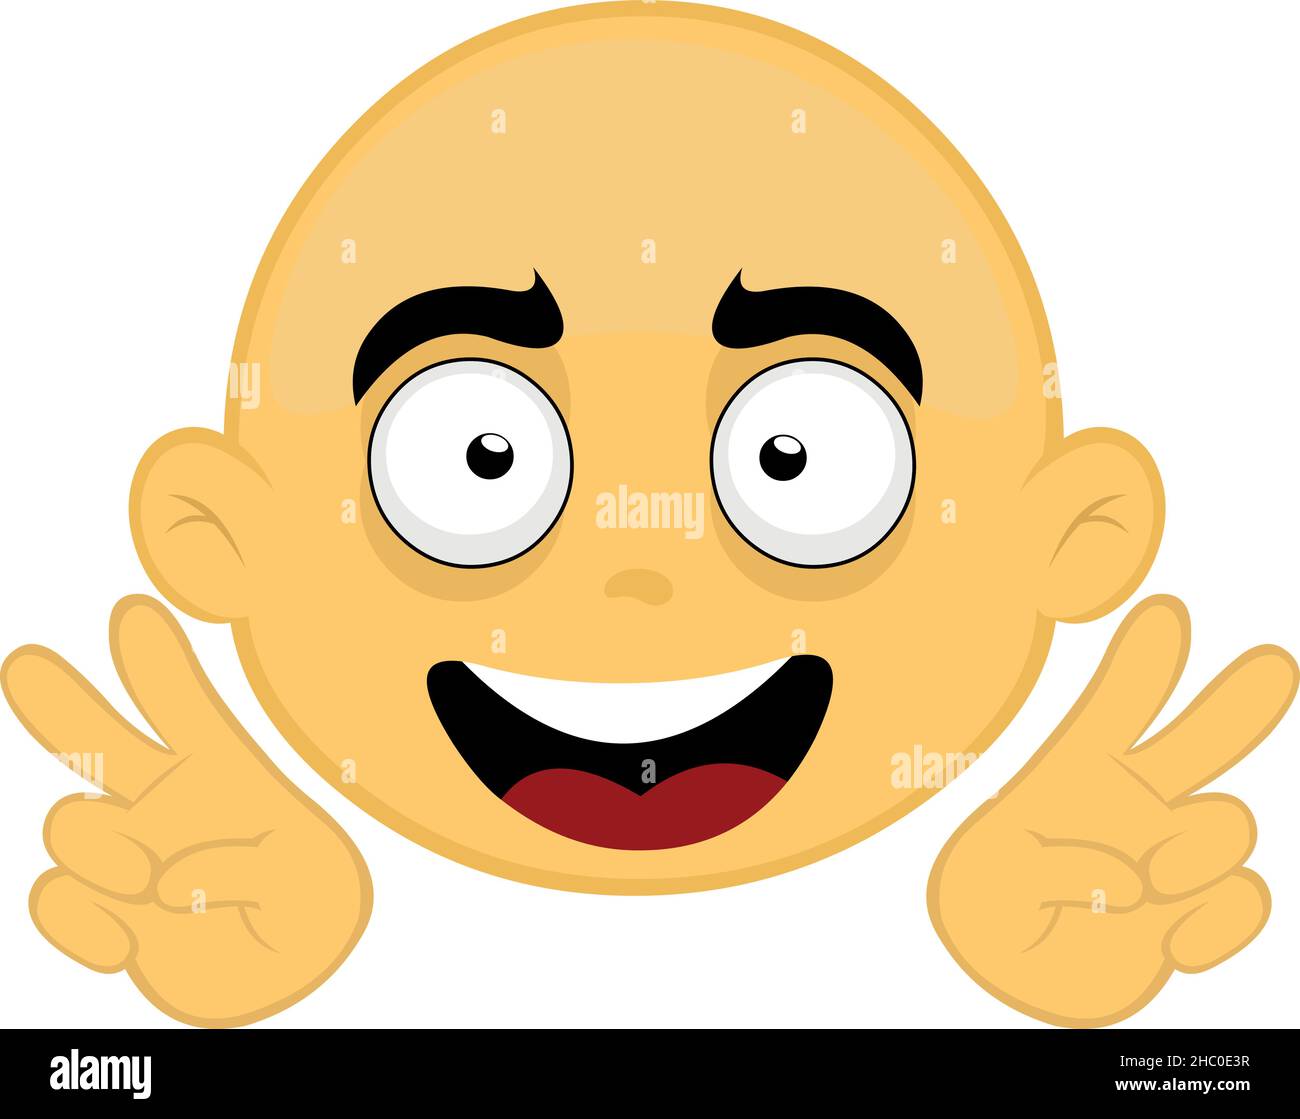 Vector illustration of emoticon of the face of a yellow bald person, making a gesture with his hands of the symbol of peace and love Stock Vector